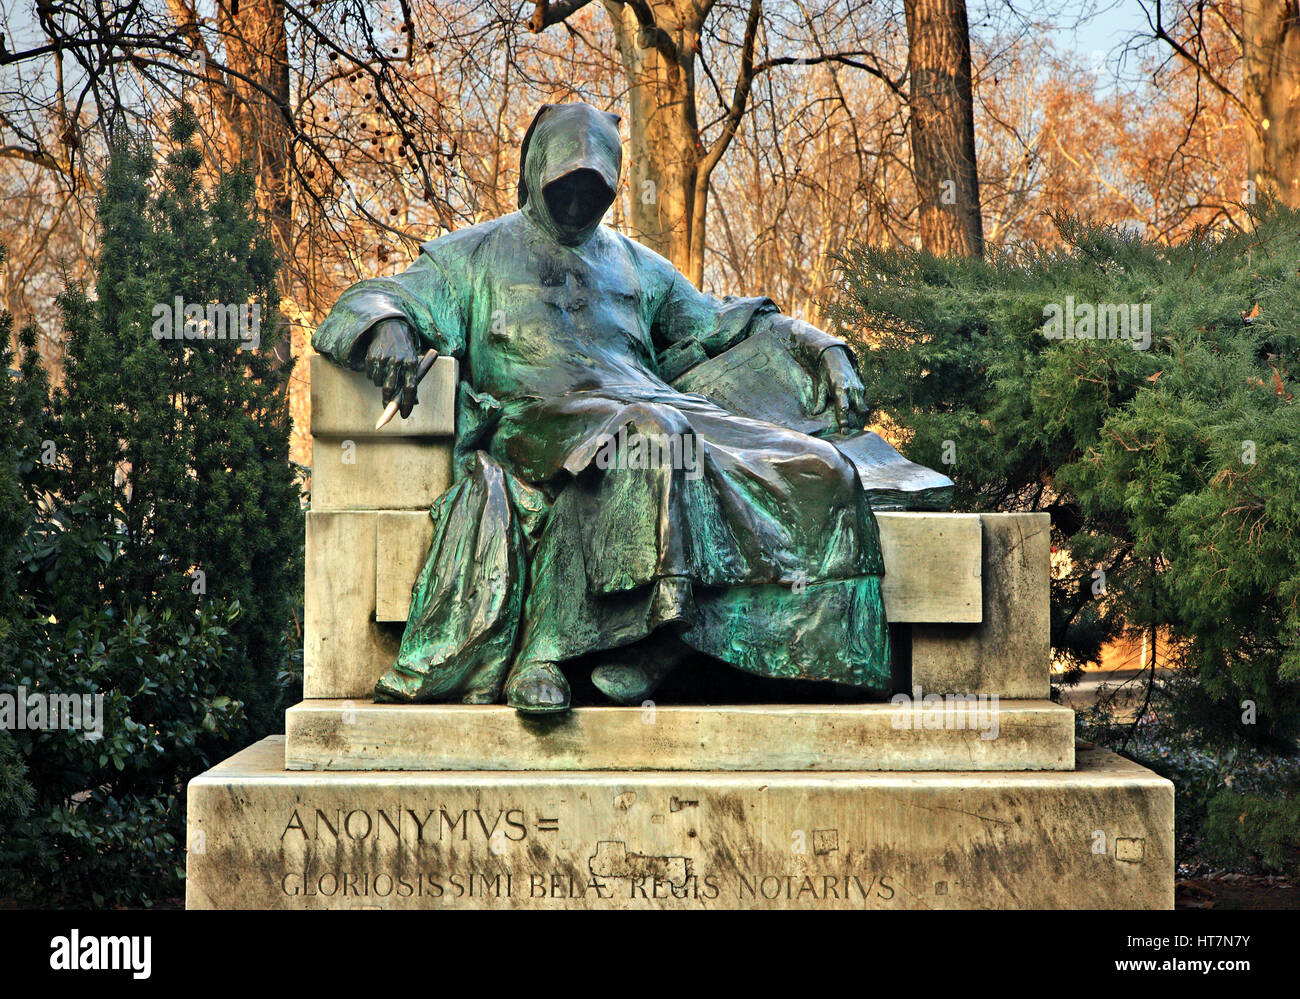 Statue of Anonymus at Vajdahunyad Castle in the City Park (Varosliget), Budapest, Hungary Stock Photo